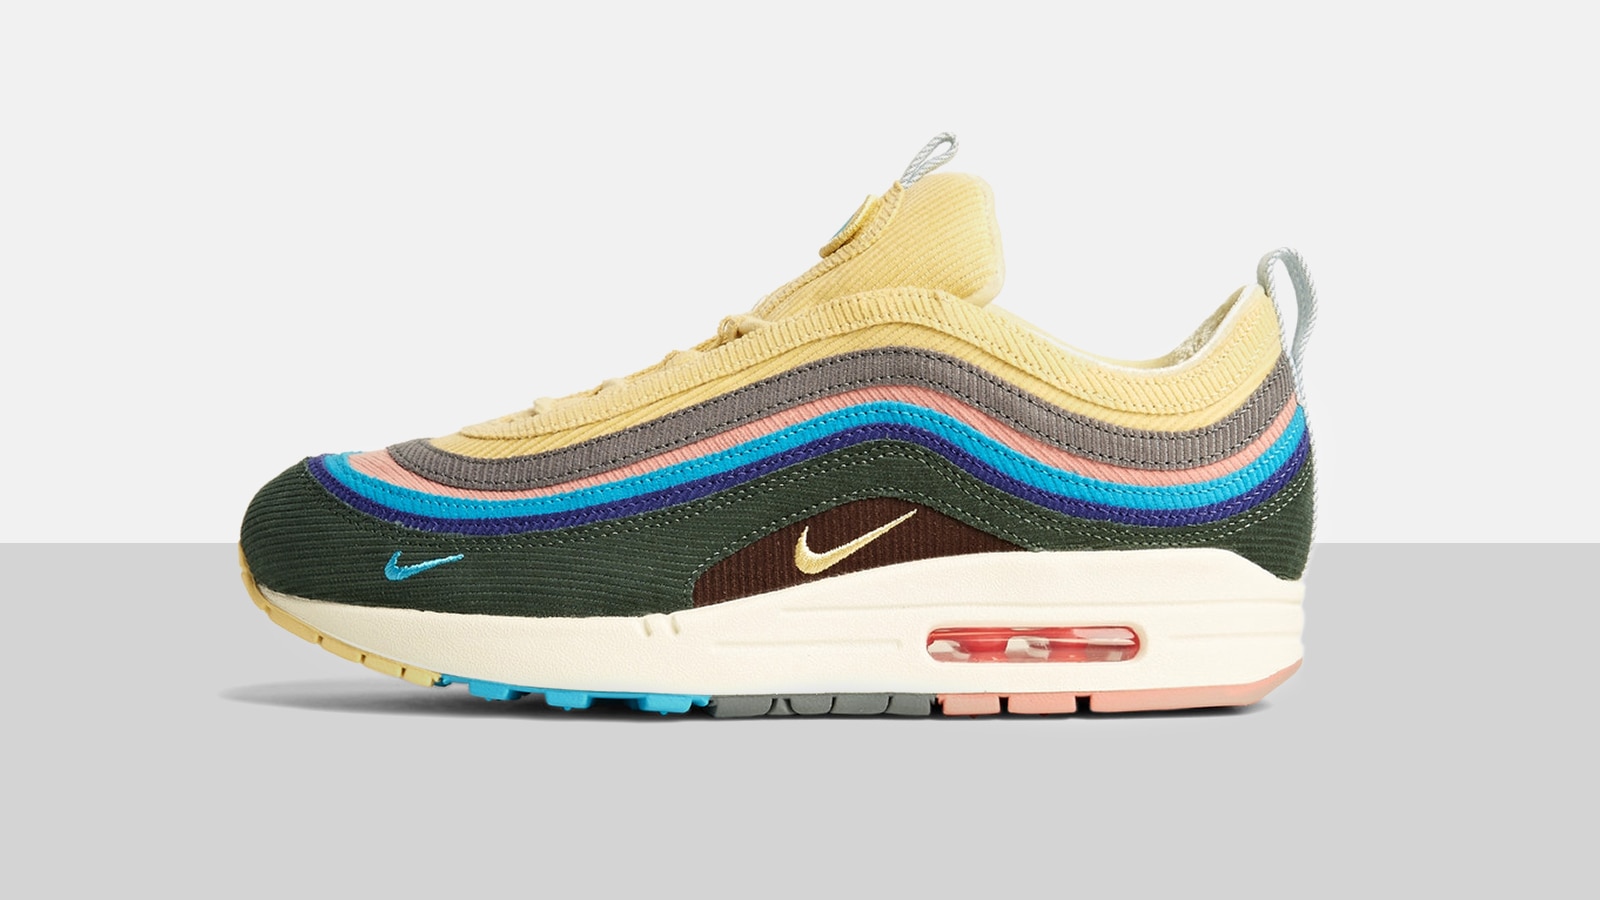 Why We're So Excited About The New Nike Air Max | The Journal | MR PORTER